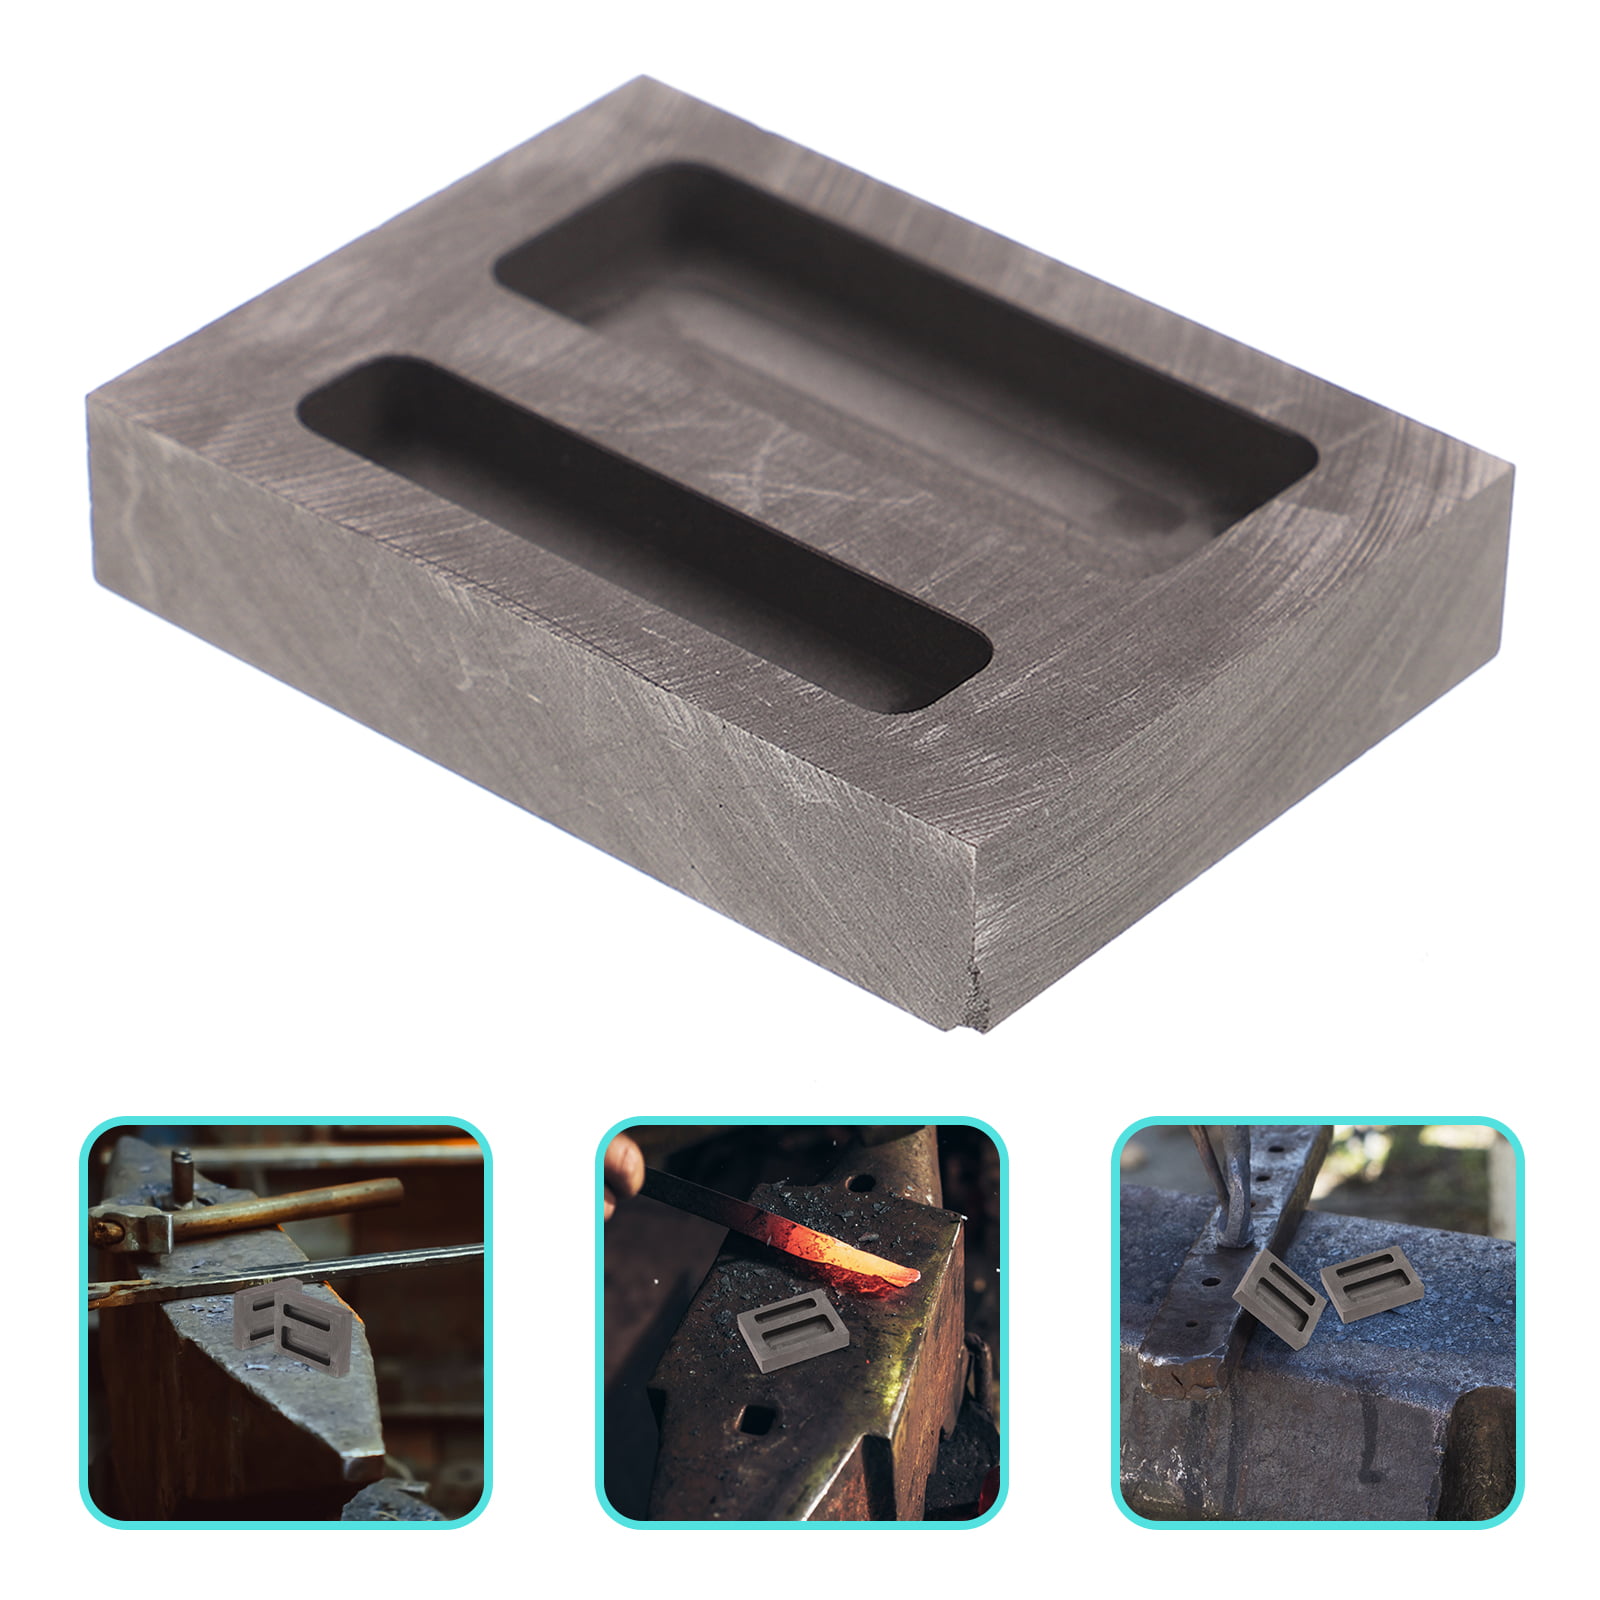 DOITOOL Graphite Tank Jewelry Molds Graphite Mold Graphite Ingot Mold  Melting Furnace Mold Metal Molds Casting Mold for Casting Outer Diameter